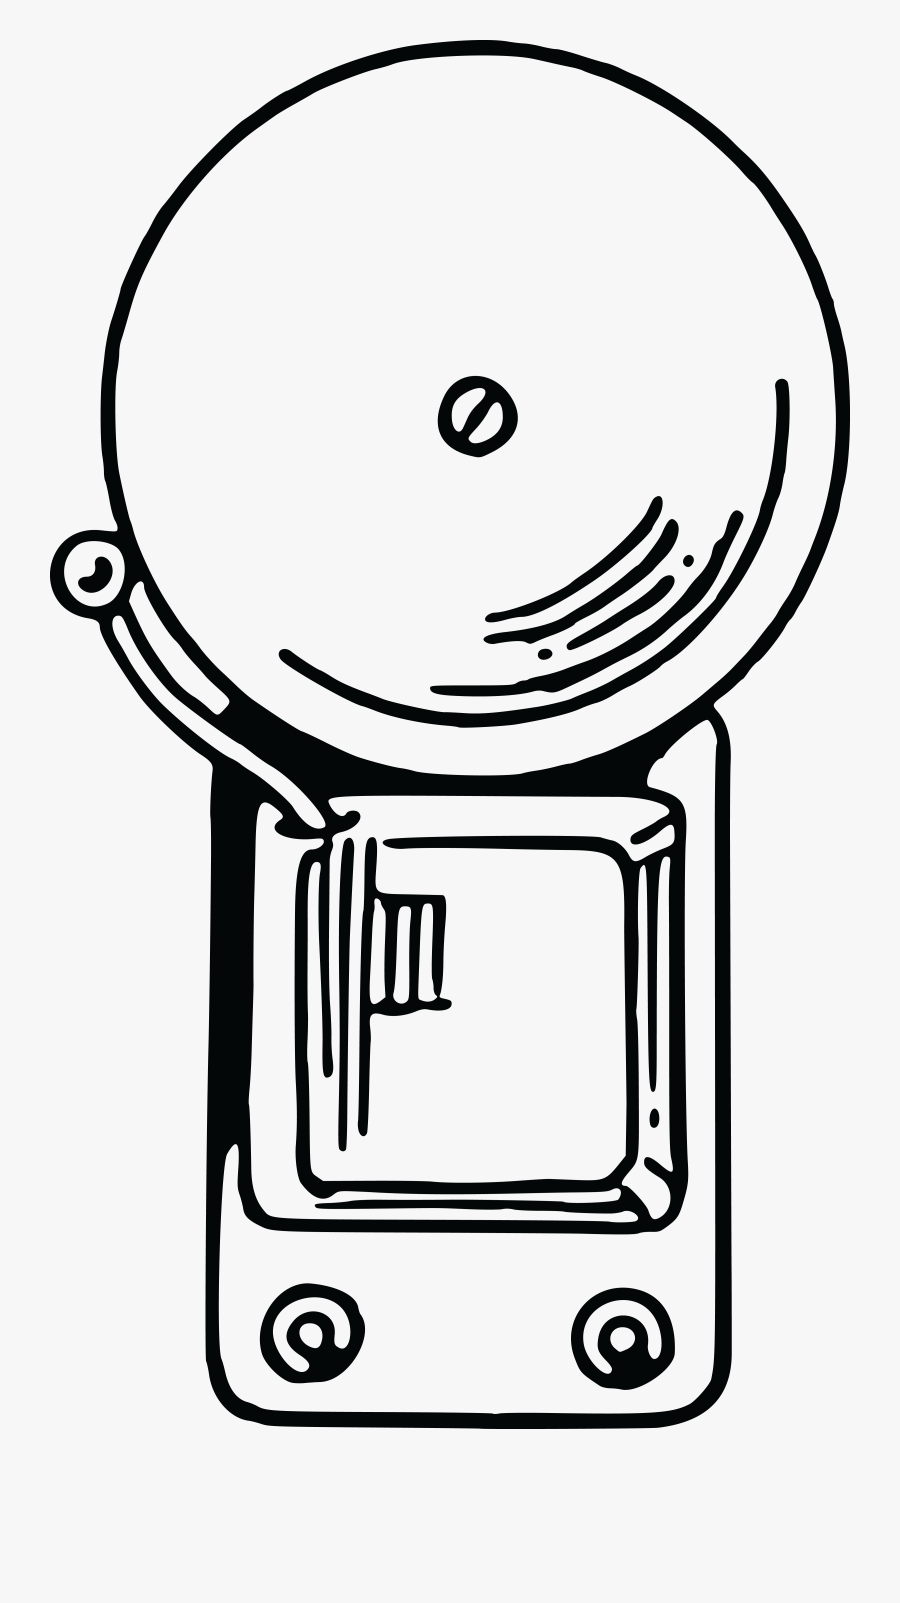 Fire Alarm Clipart Black And White, Transparent Clipart